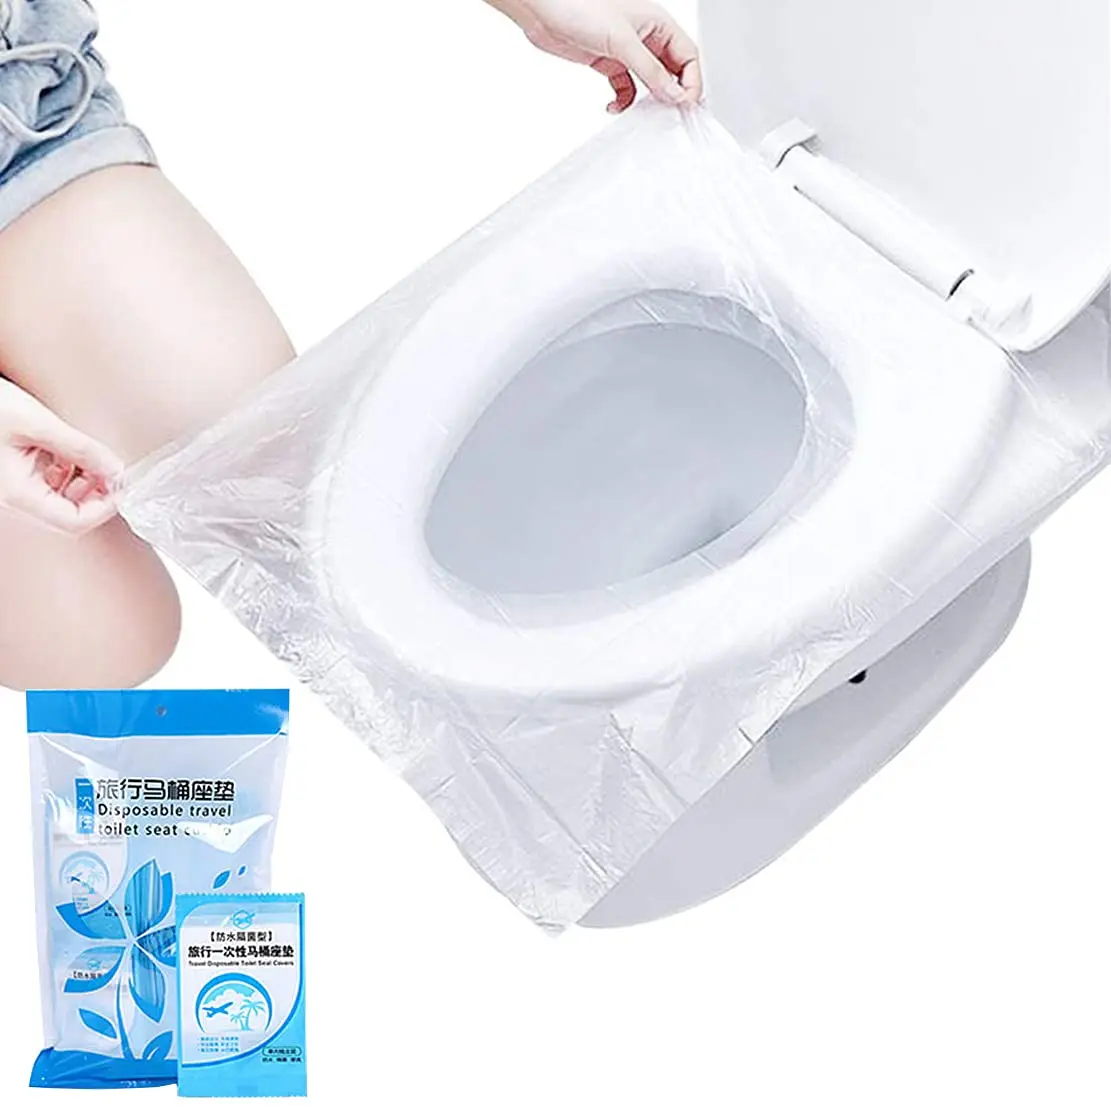 6/50PCS Biodegradable Disposable Plastic Toilet Seat Cover Portable Safety Travel Bathroom Toilet Paper Pad Bathroom Accessory